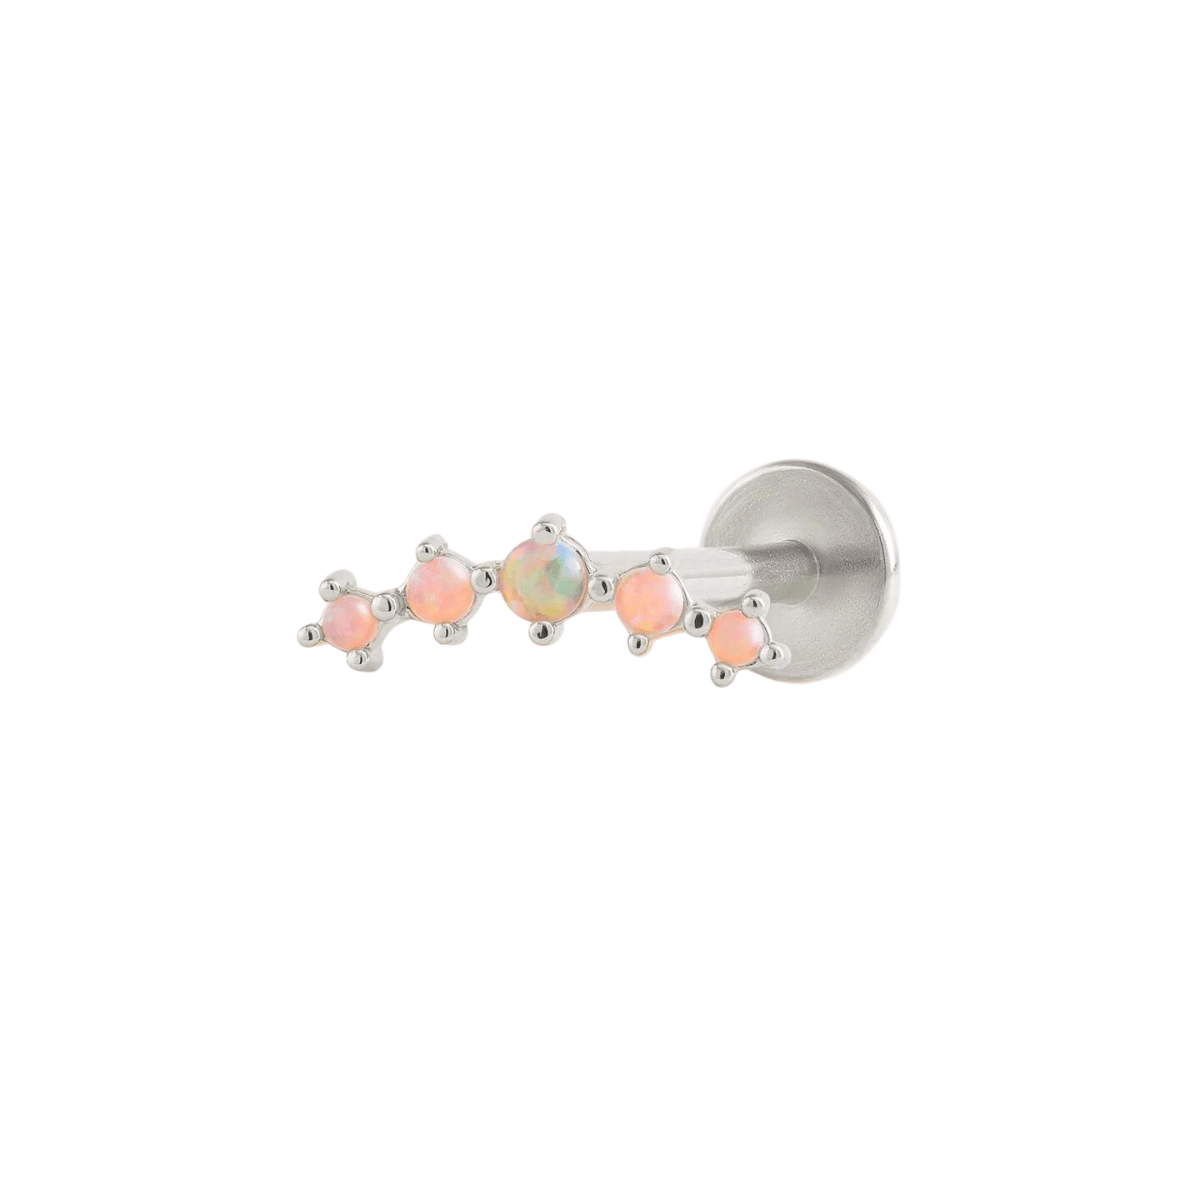 CURVED Pink OPAL CARTILAGE Flat Back PIERCING EARRING (18G)